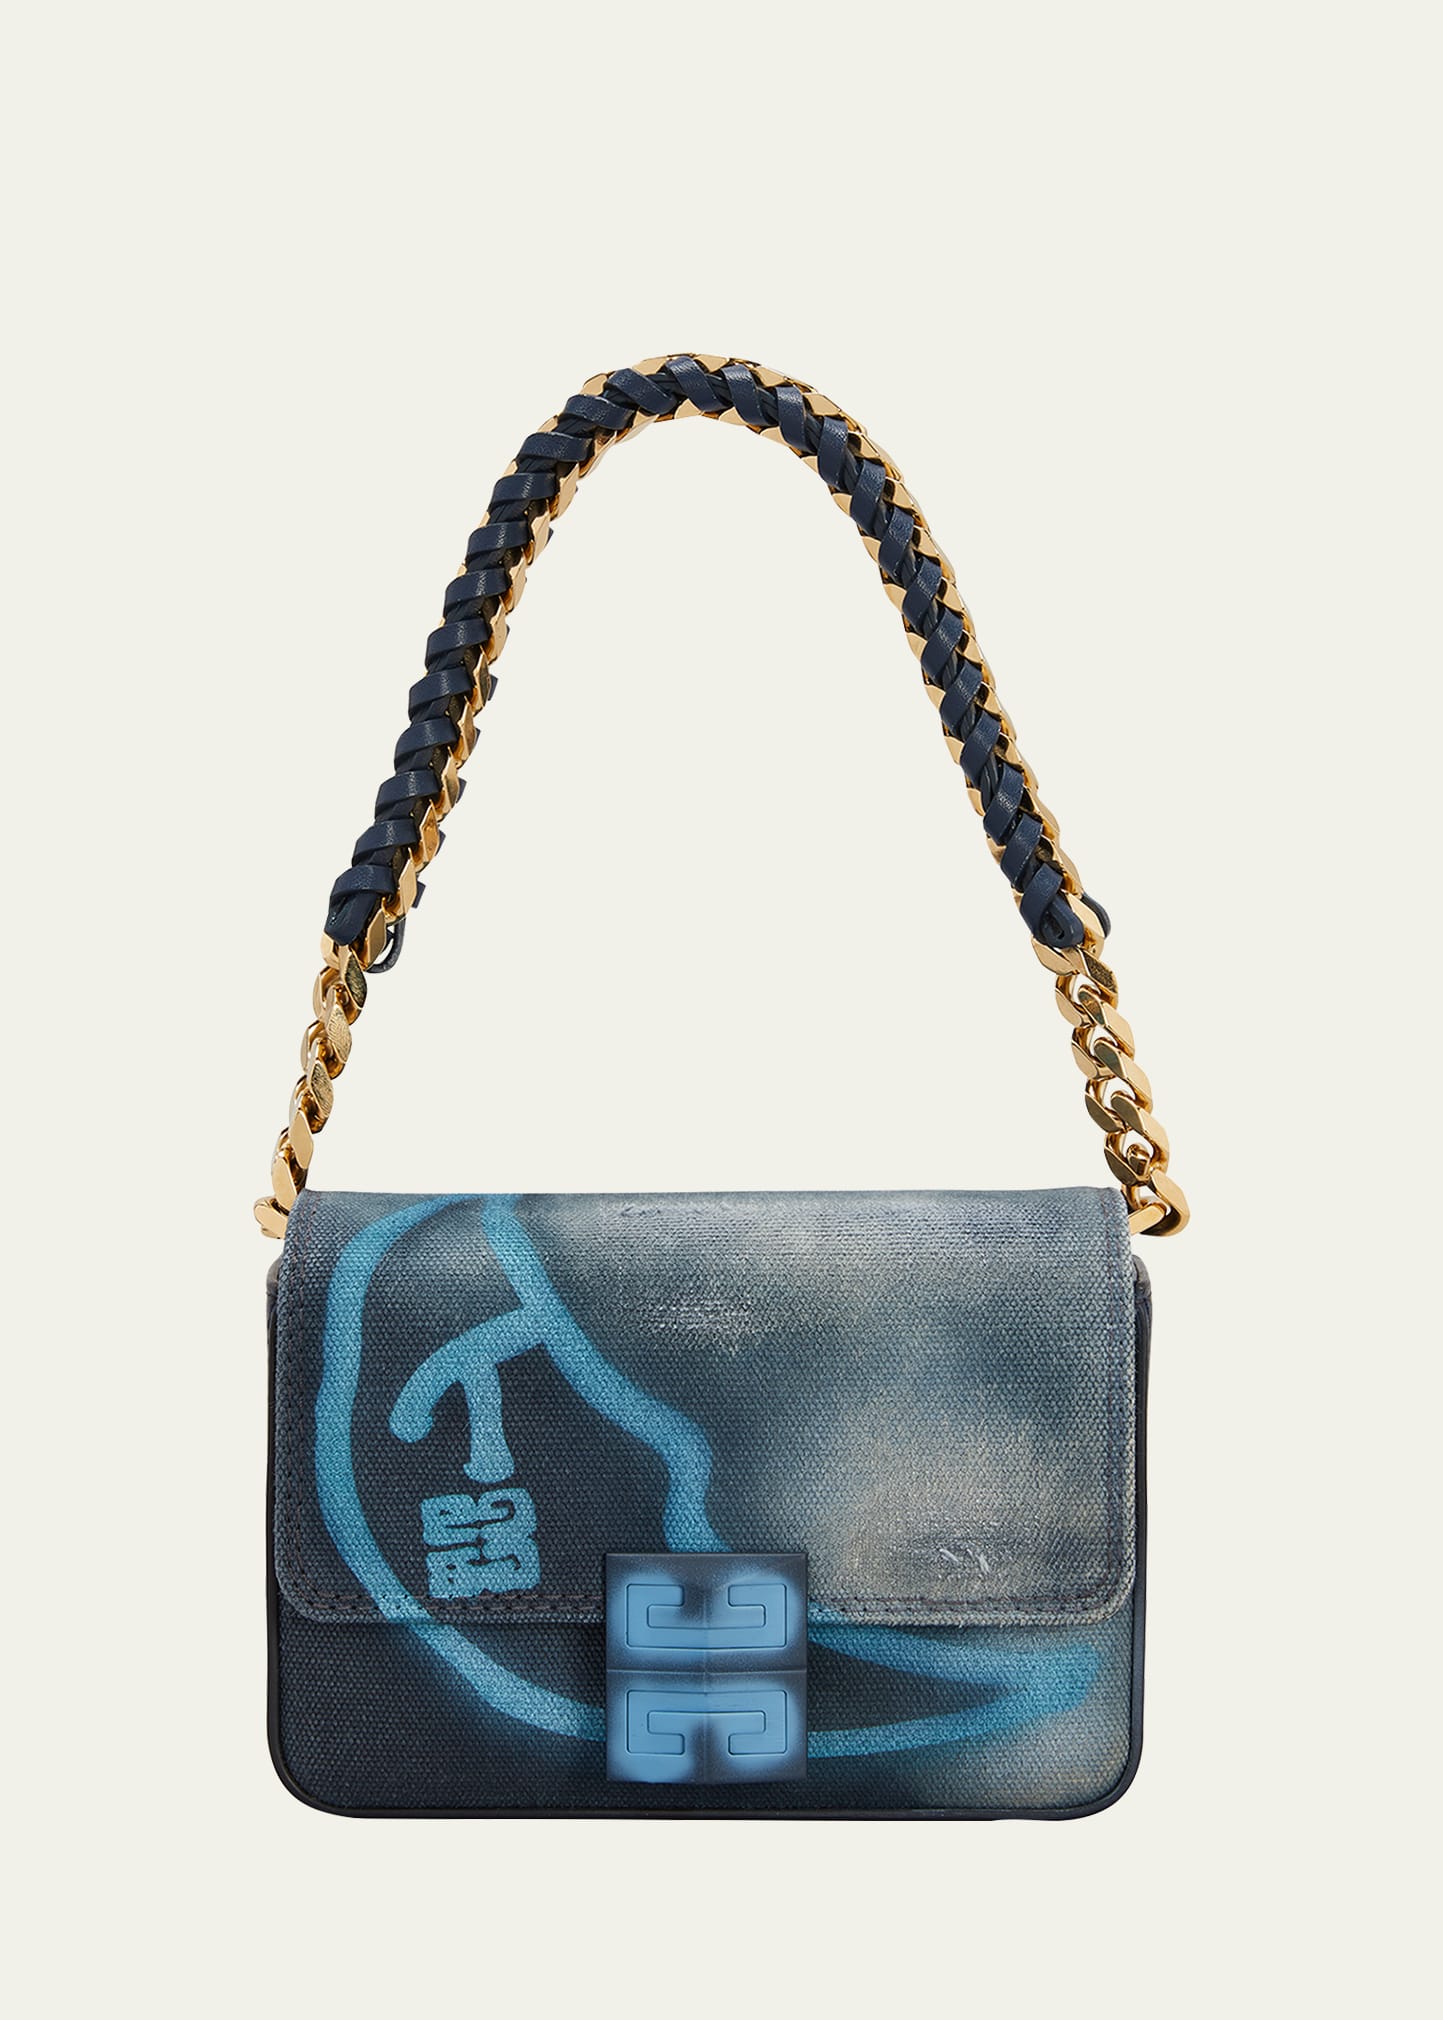 Givenchy 4G Small Half-Moon Graphic Shoulder Bag in Denim